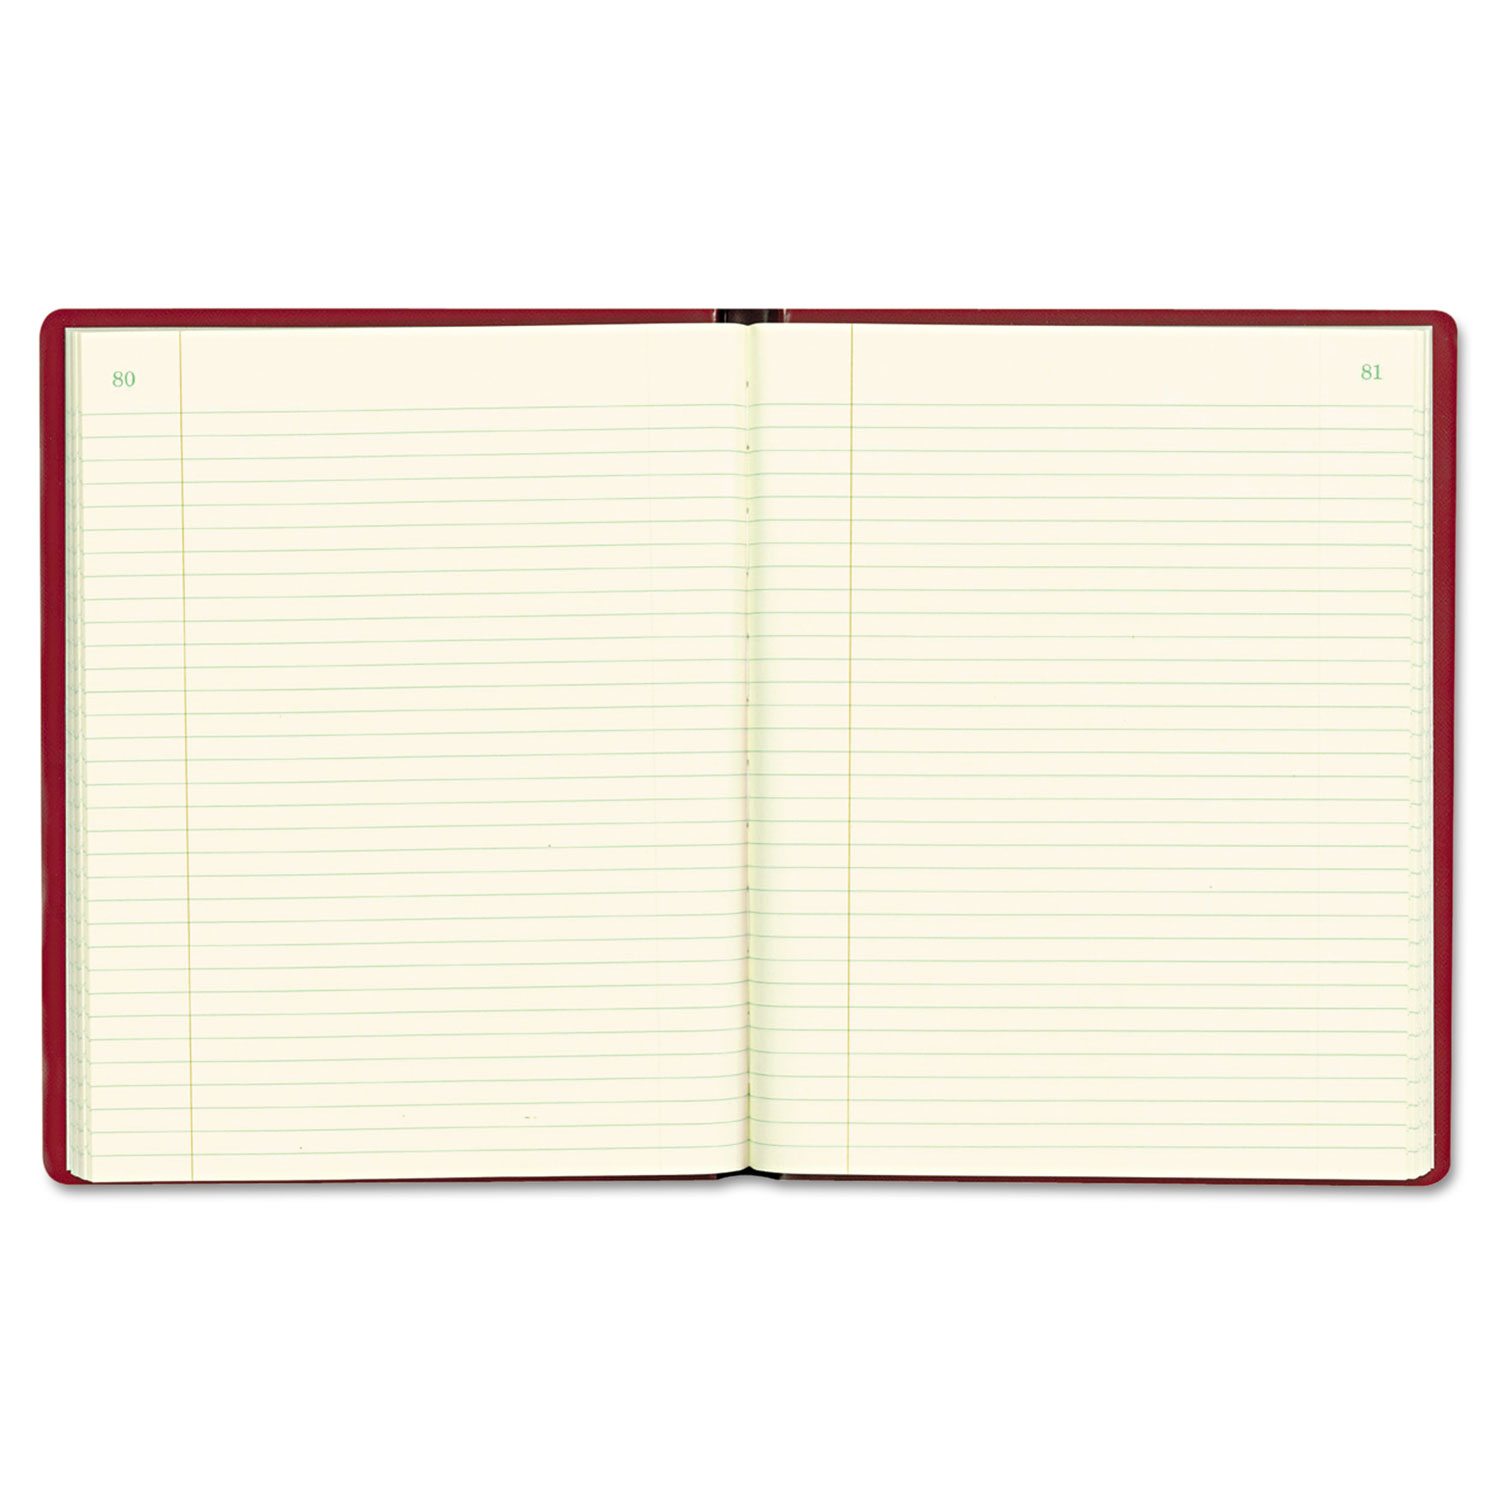 Rediform® Red Vinyl Series Journal, 300 Pages, 7 3/4 x 10 Sheets, 8 1/4 x 10 1/2 Book, Red